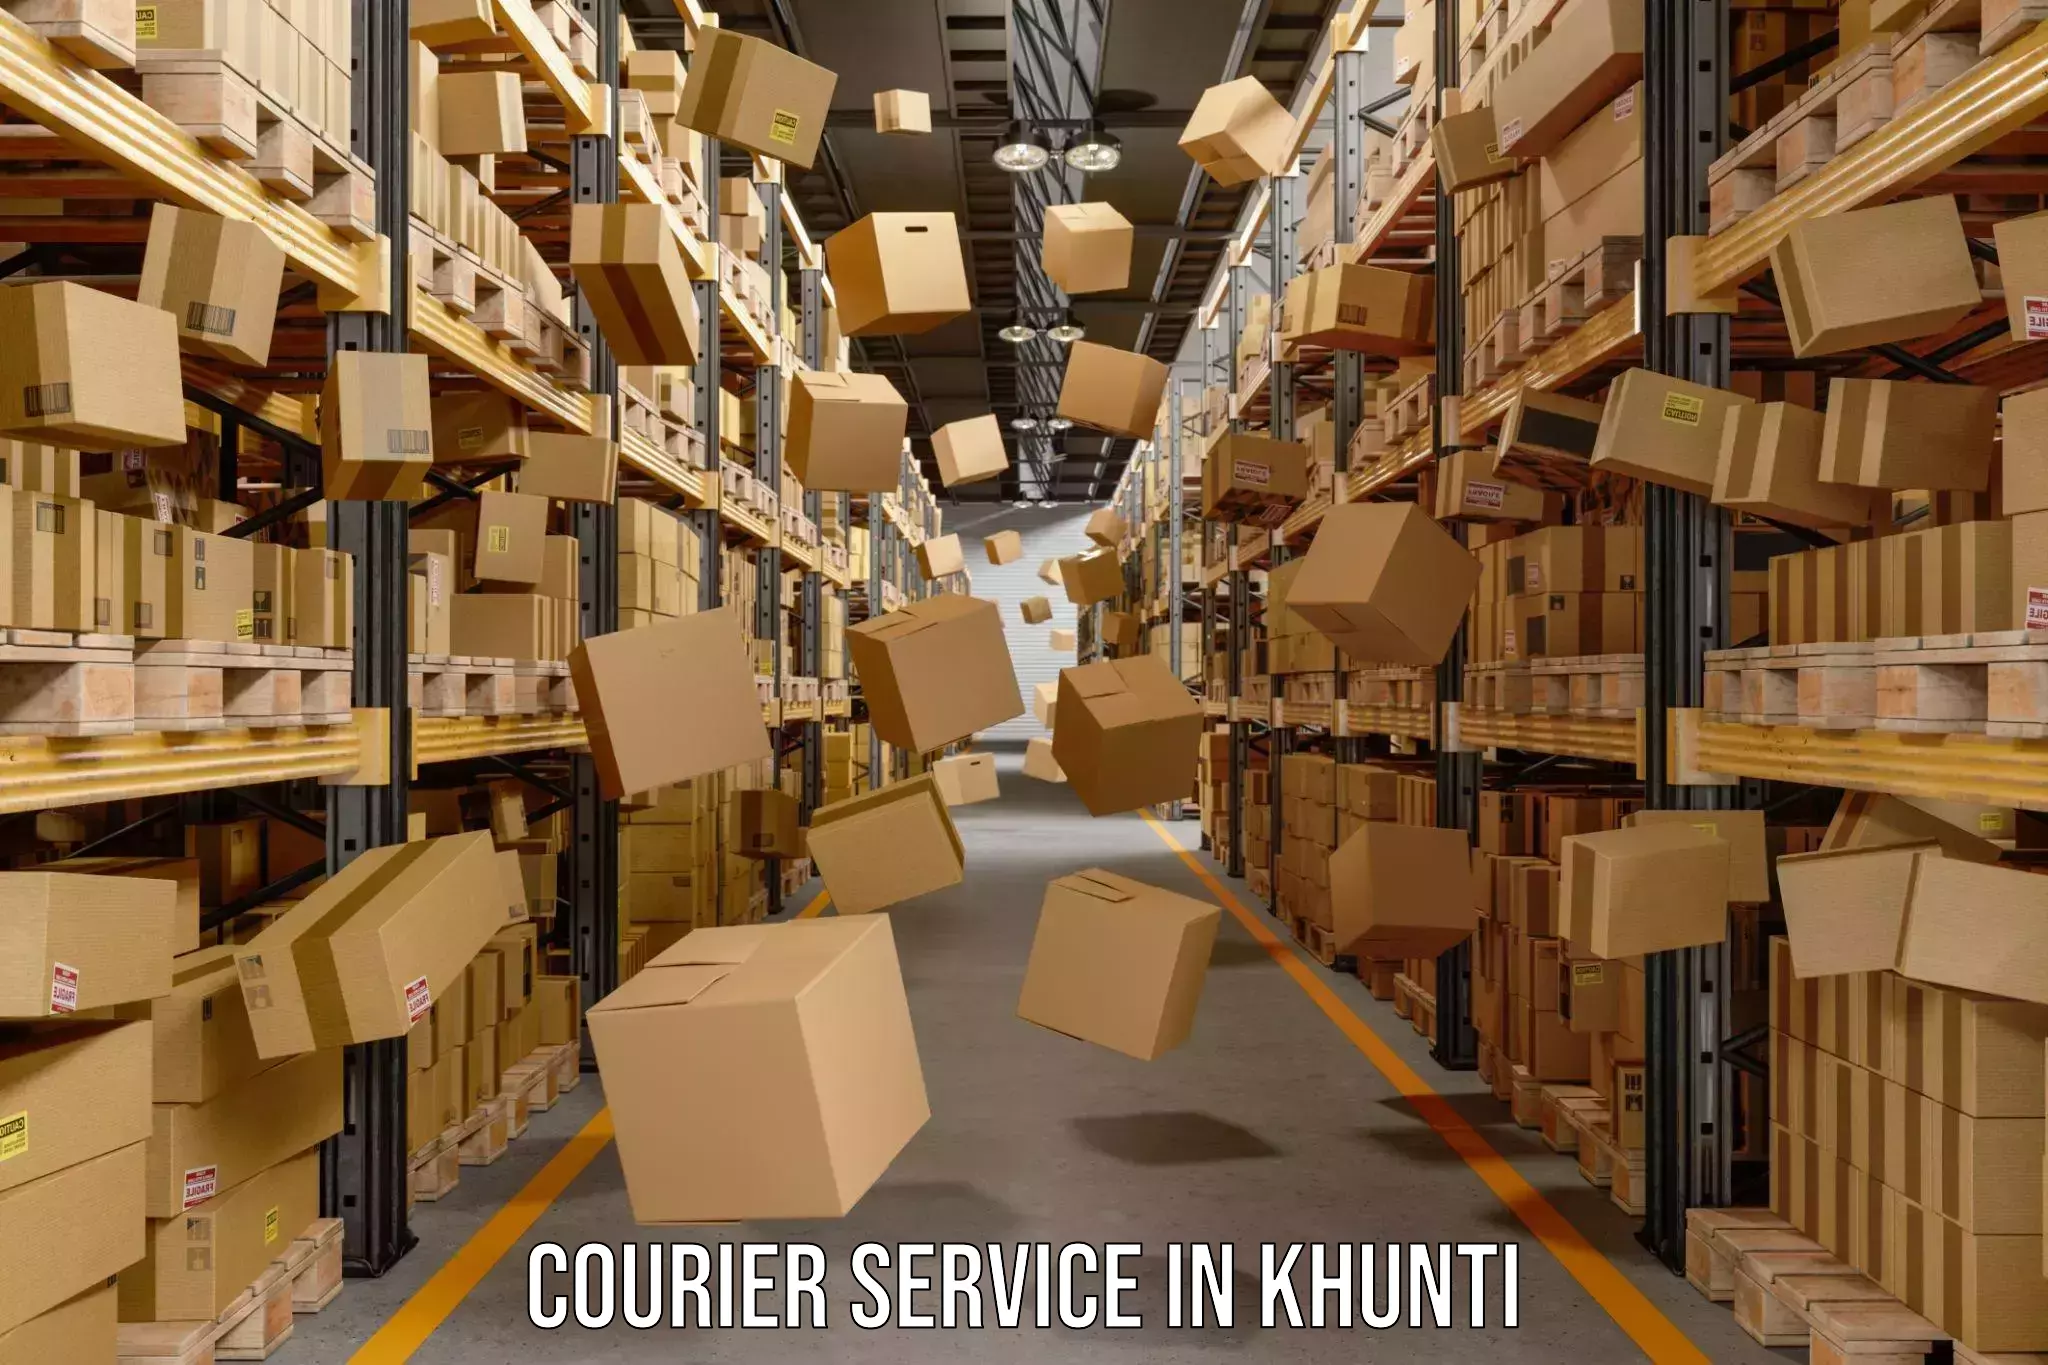 Expedited parcel delivery in Khunti